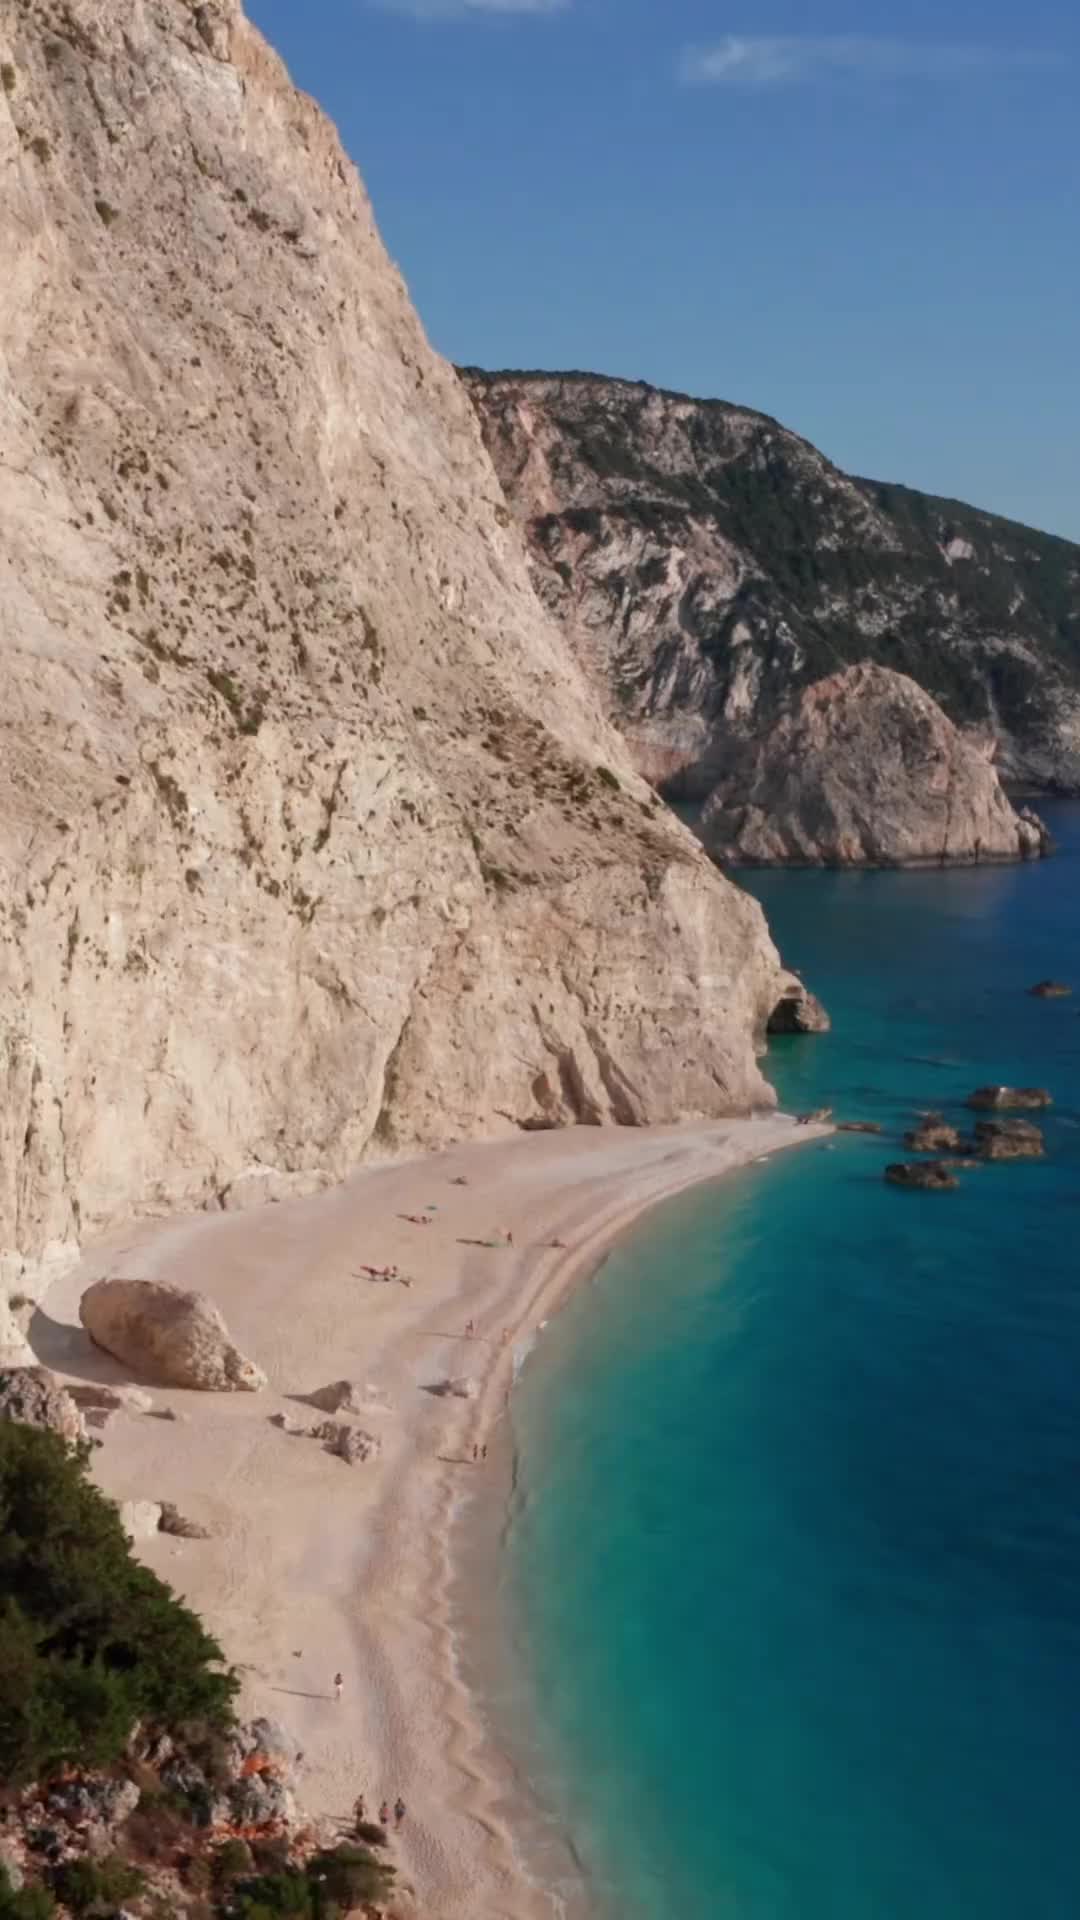 ℹ️ Lefkada Beaches 🇬🇷
📍Porto Katsiki
📍Egkremni
📍Kathisma
📍Milos
ℹ️Lefkada is a Greek island in the Ionian Sea, connected to the mainland by a causeway. West coast beaches like Porto Katsiki and Egremni feature sheer cliffs and turquoise waters. The east coast is known for its traditional villages, including the seaside resort of Nydri.
•
•
•
#lefkada #lefkadaisland #ae_greece #greek_islands #loves_greece #gf_greece #greece #ulimitedgreece  #exquisite_greece #beautifuldestinations 

#lefkadabeaches #lefkadagreece #super_greece #greecelover_gr #greecestagram #greecetravelergr1_ #welovegreece_ #feelgreece #reasontovisitgreece 

#lefkada_island #visitlefkada #greece_is_awesome #life_greece #kings_greece #travel_greece #team_greece #greece #expression_greece #earthbestshots #fantastic_earth